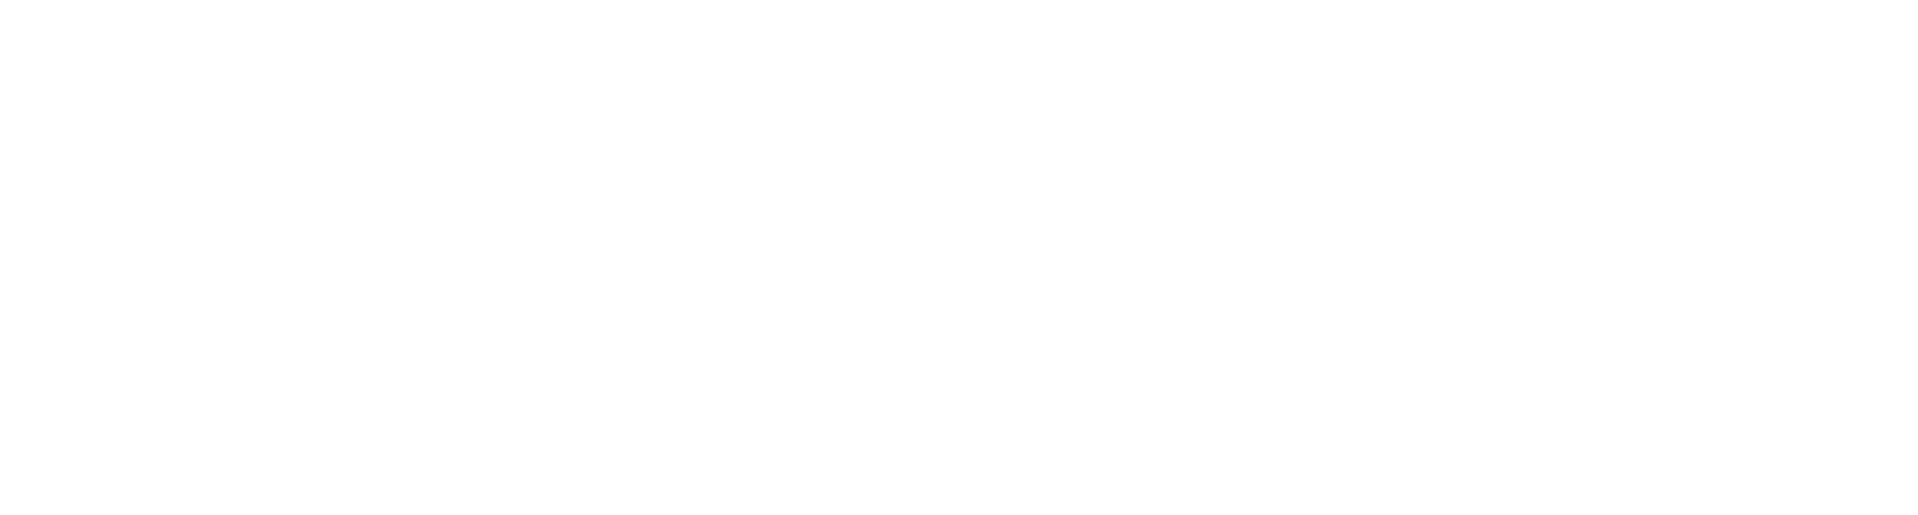 Medical White Logo - Revenue Cycle Management & Medical Billing Company | Meridian